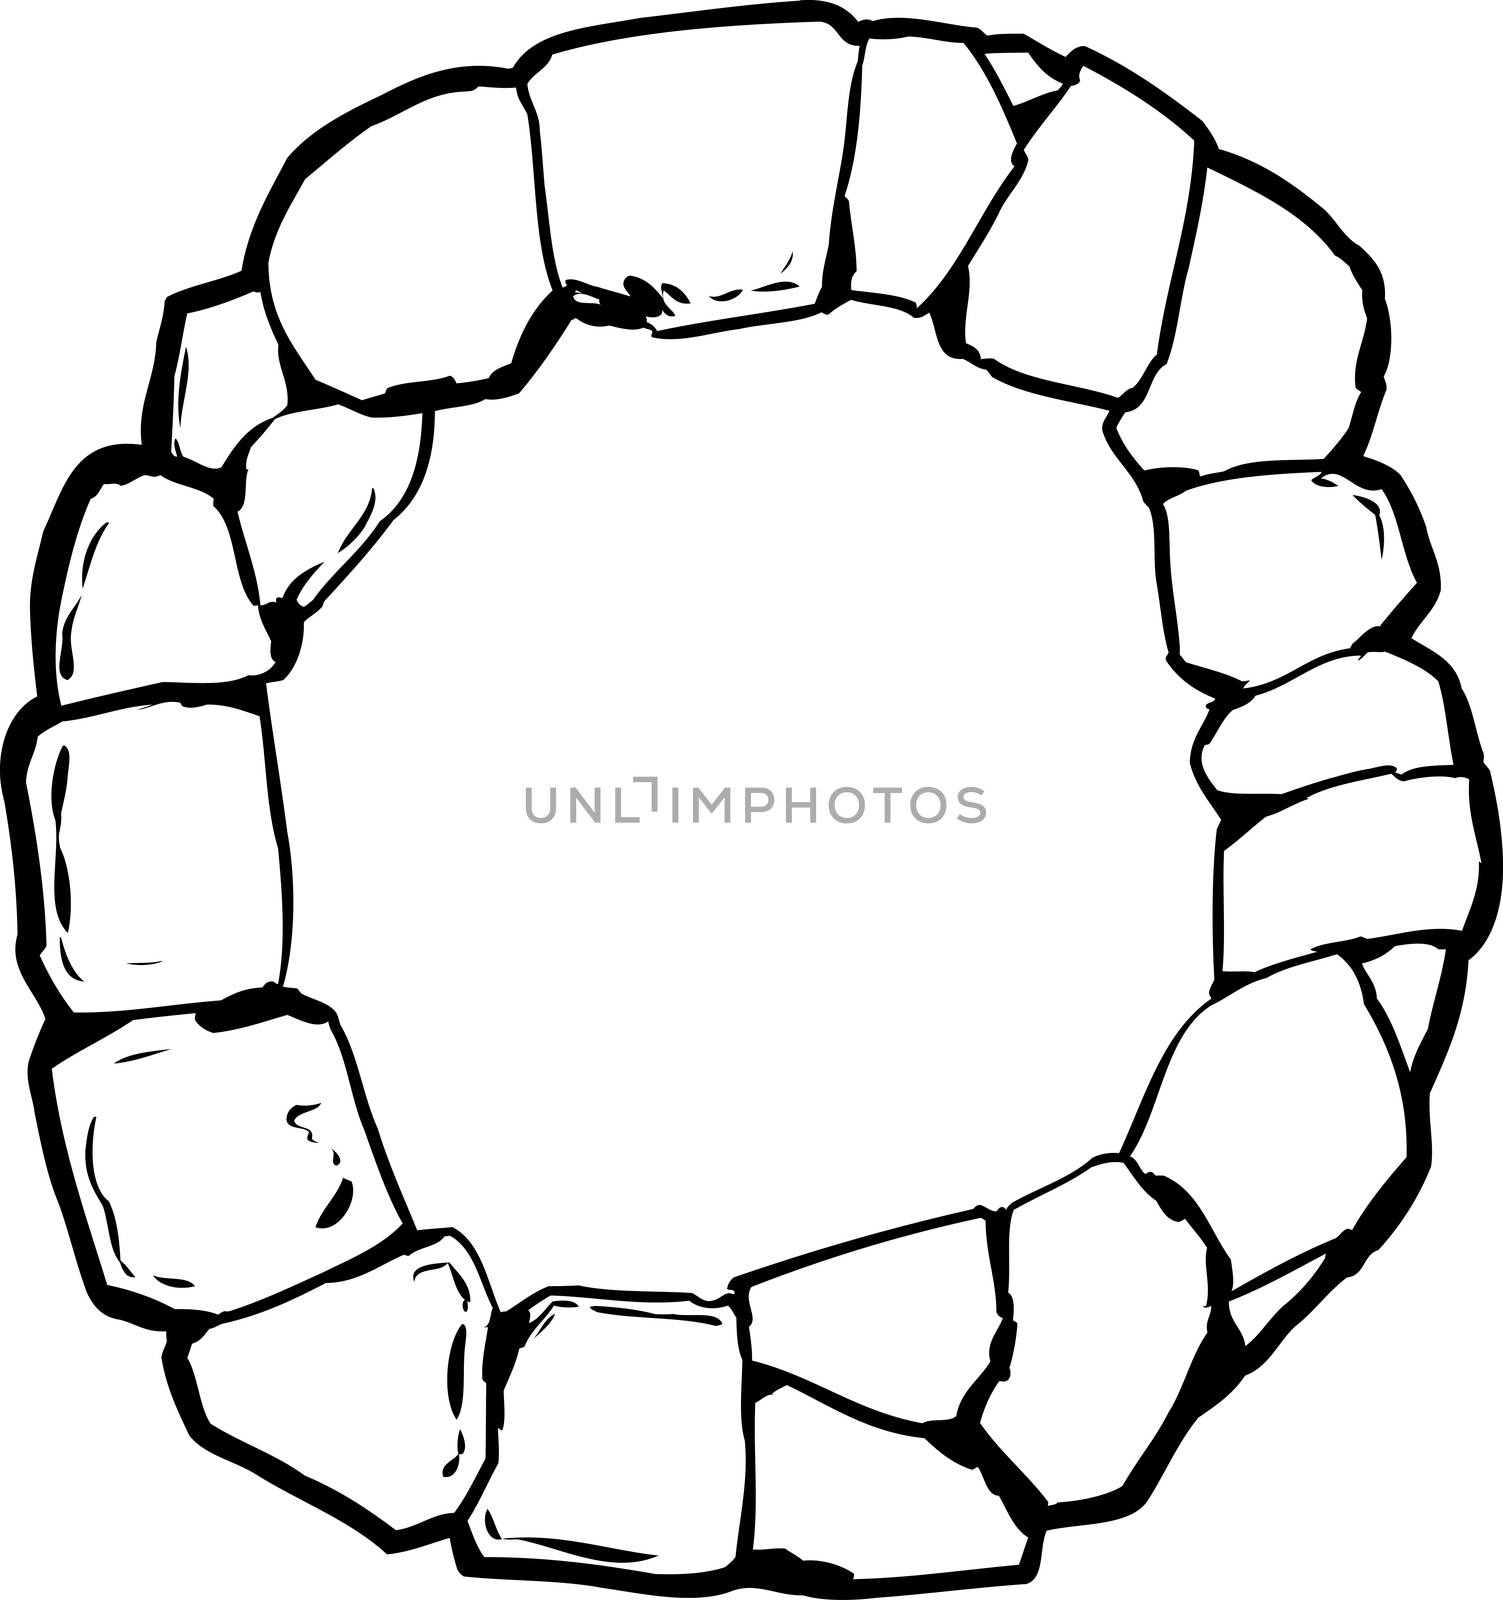 Outlined sketch of top down view on old stone ring for well or Letter O